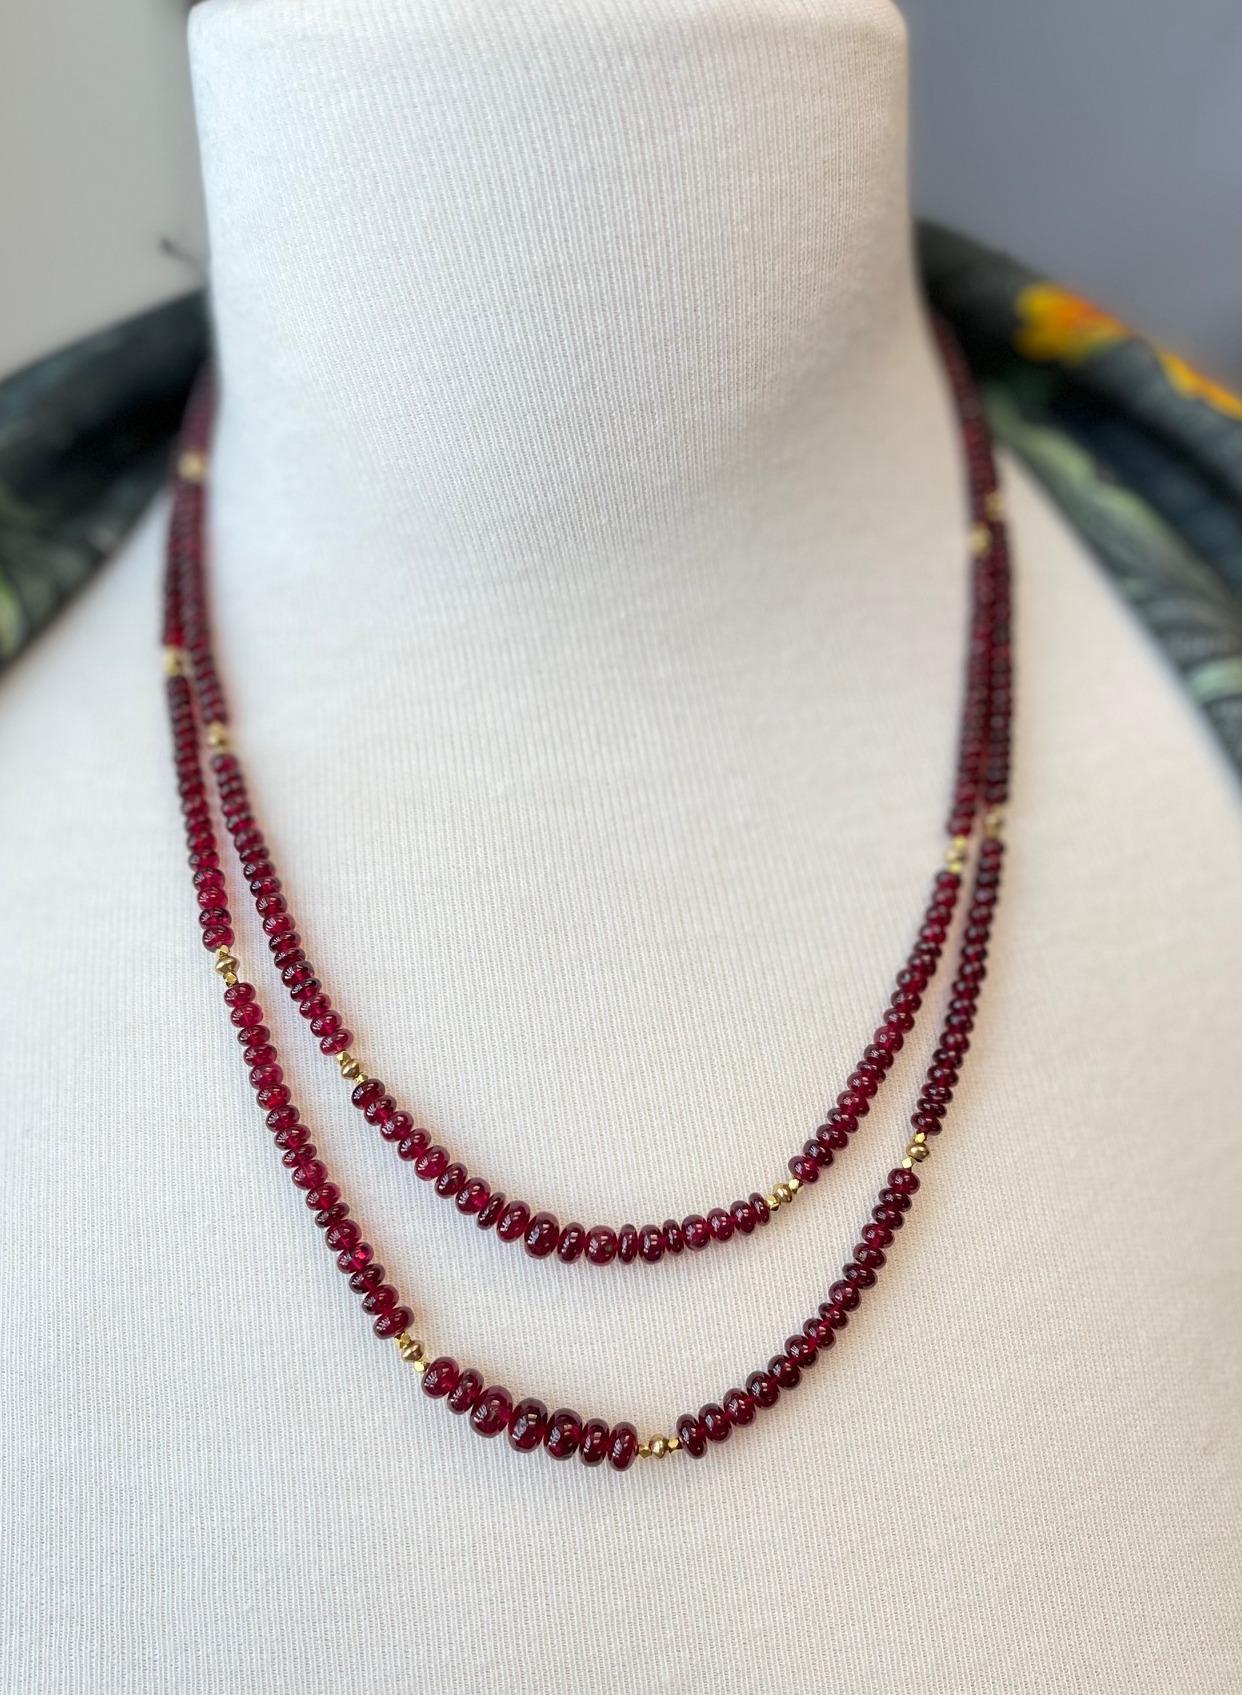 Women's or Men's Red Spinel Graduating Bead Necklace with Yellow Gold Spacers, 19 Inches For Sale